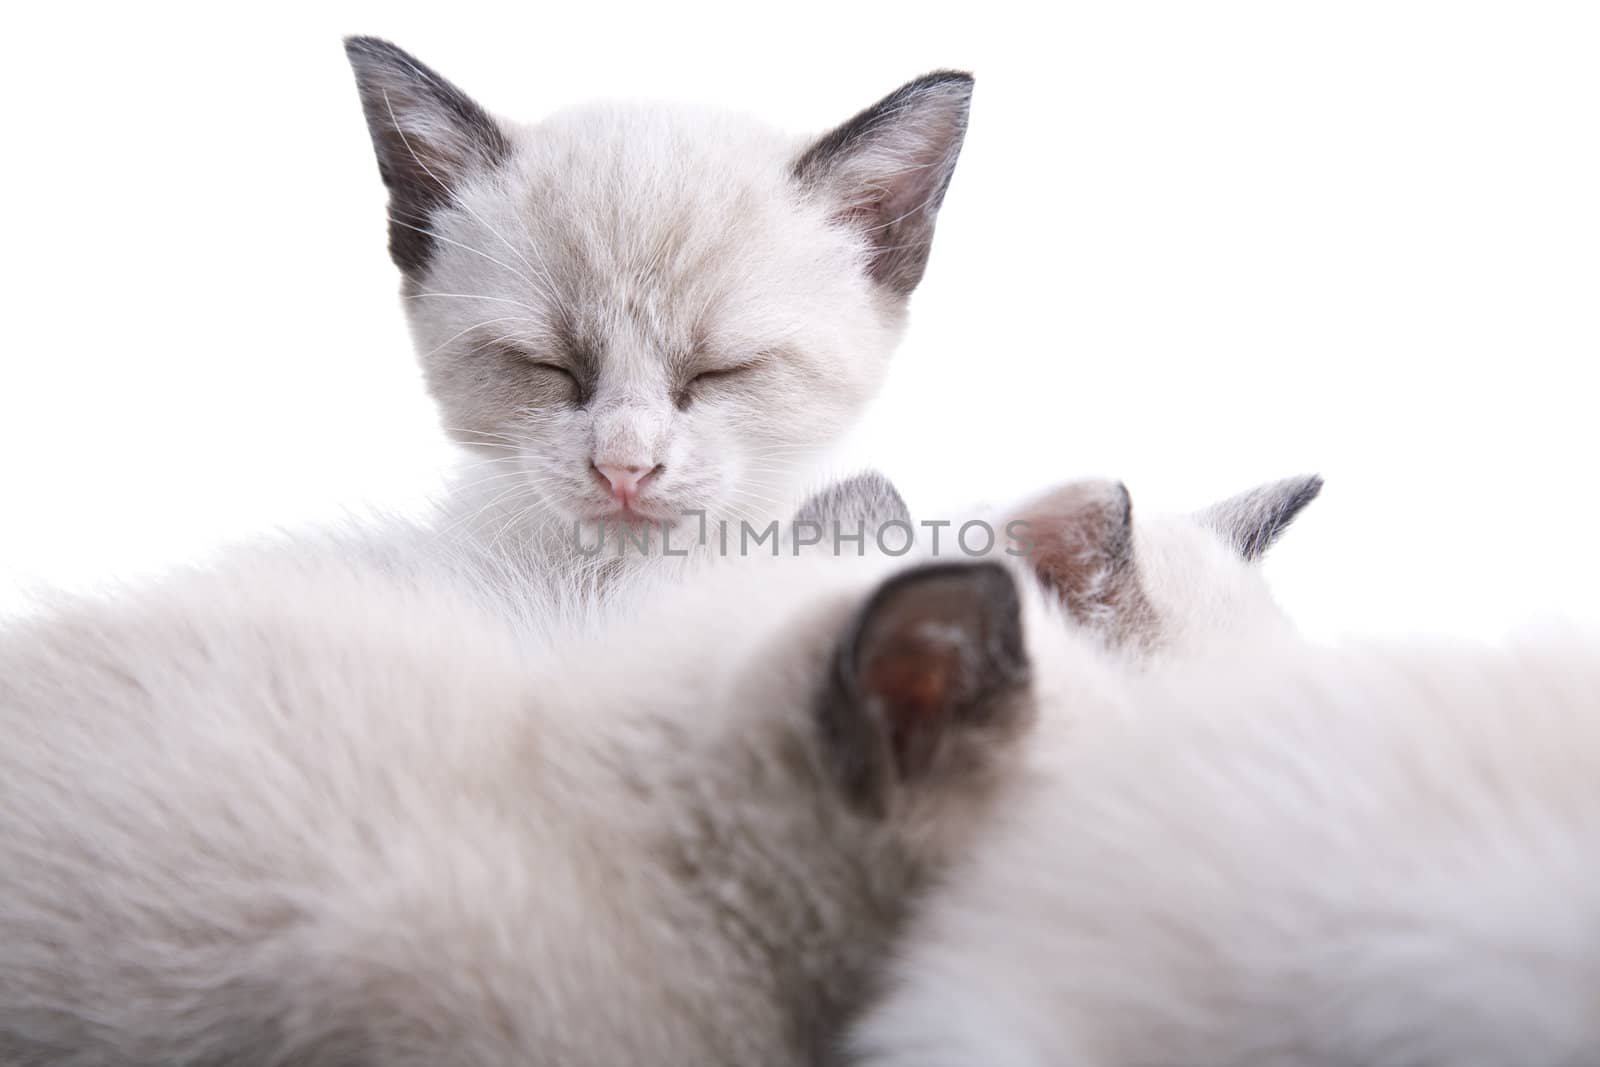 Adorable baby kittens sleeping together. Isolated on white.